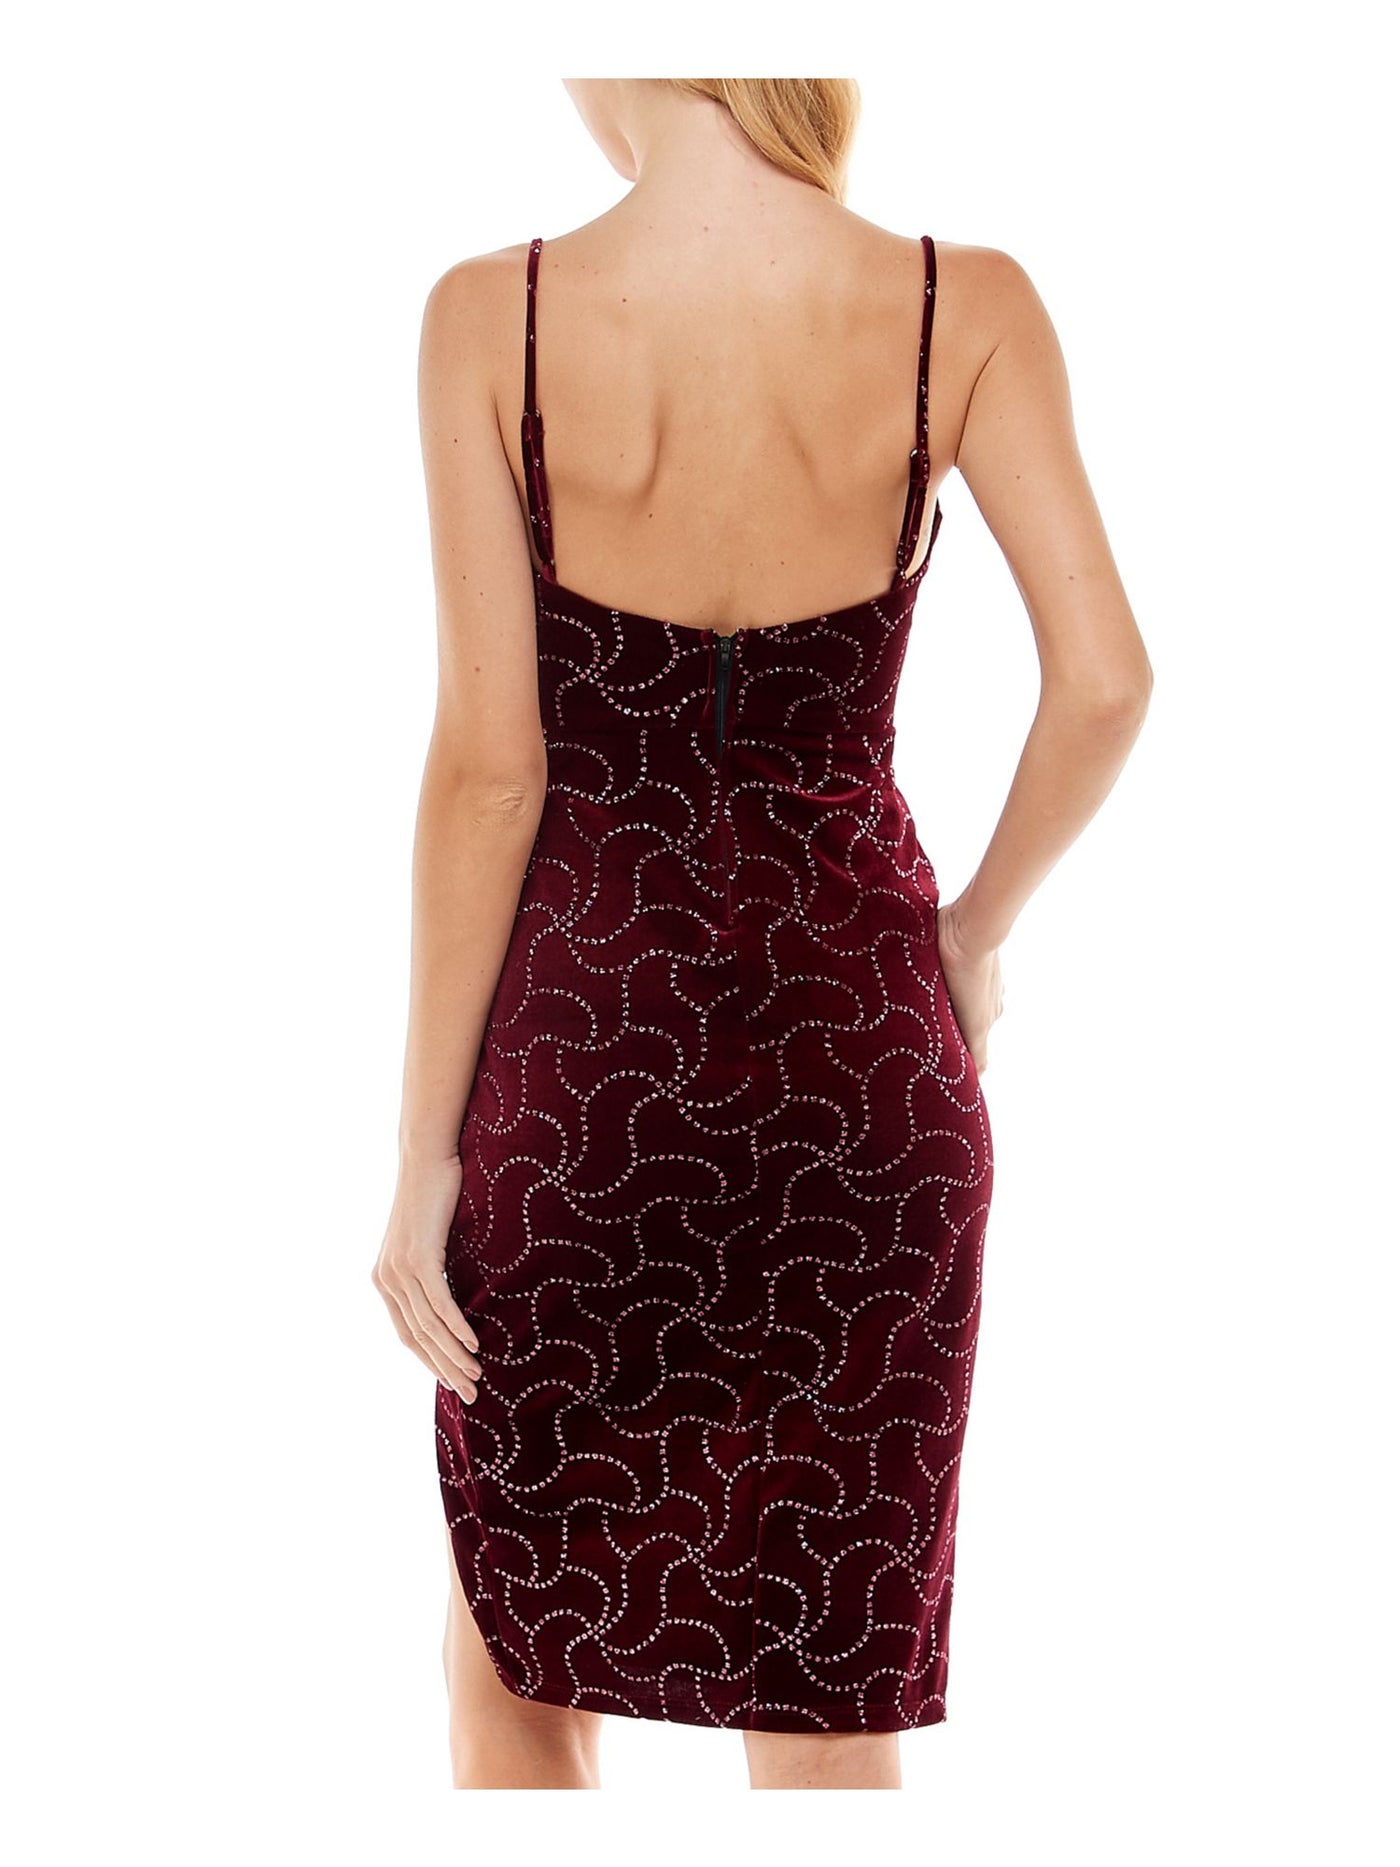 CITY STUDIO Womens Burgundy Zippered Slitted Lined Molded Bodice Spaghetti Strap Sweetheart Neckline Above The Knee Party Sheath Dress Juniors XS